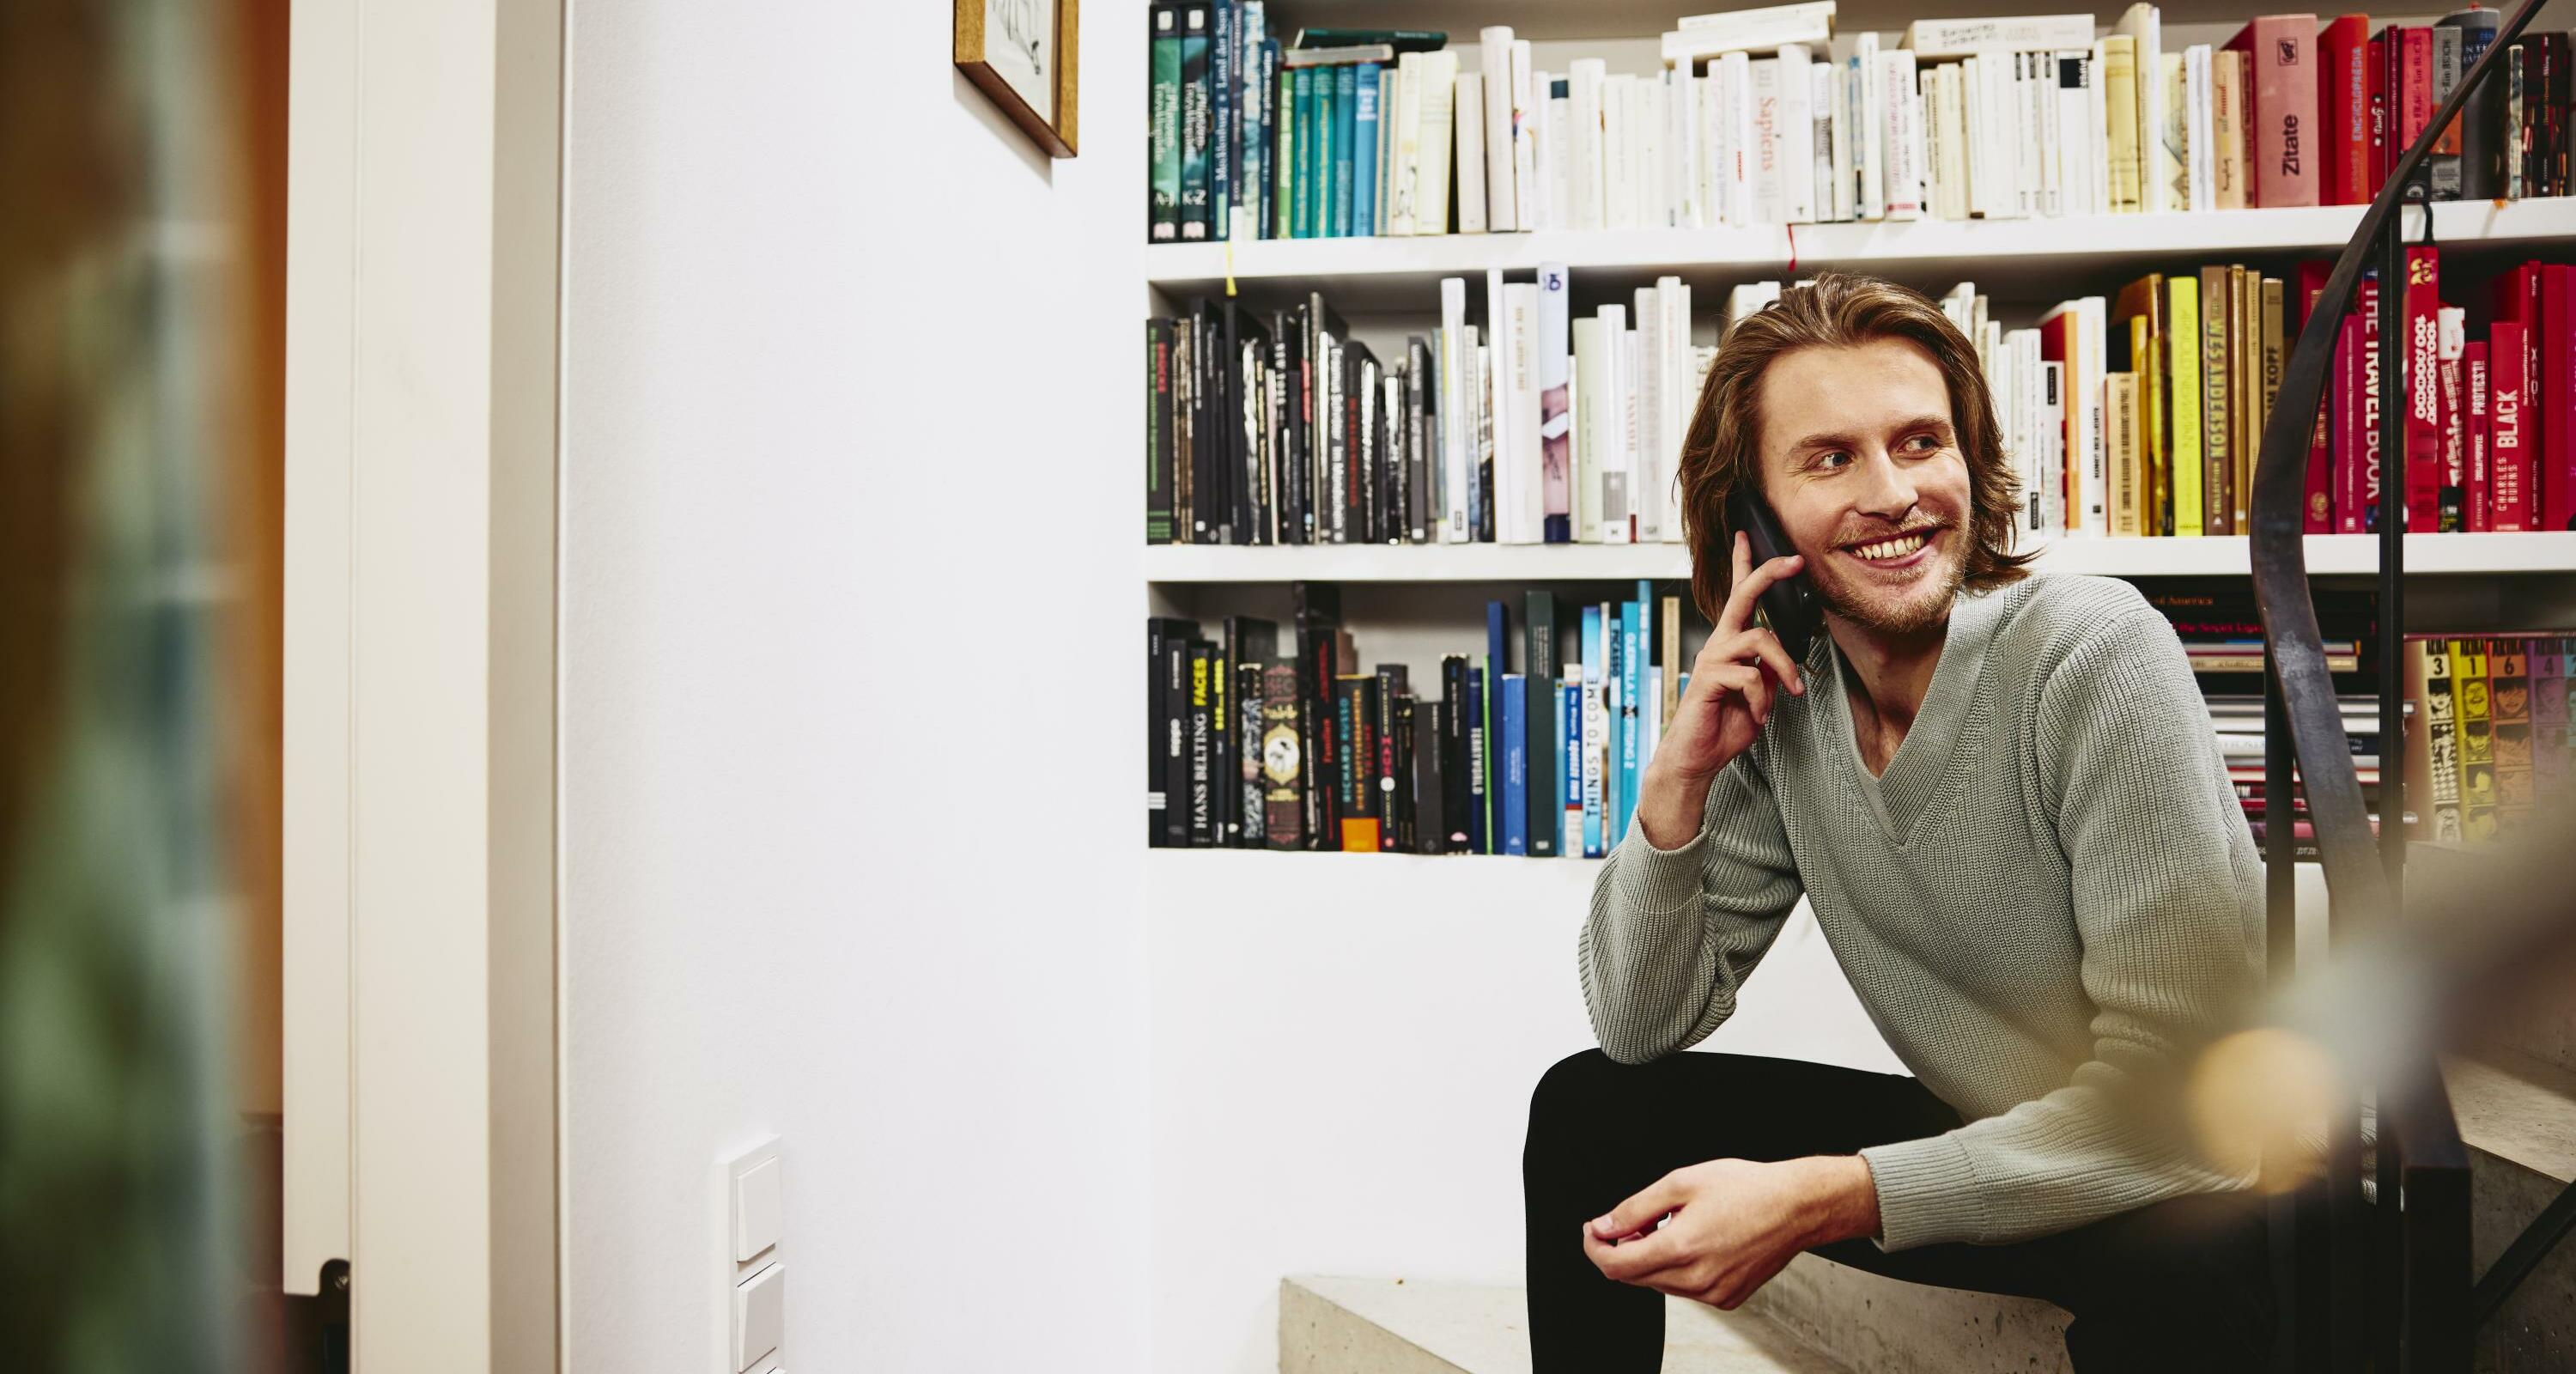 Smiling man sitting on stairs, having a phonecall. bookshelf in background